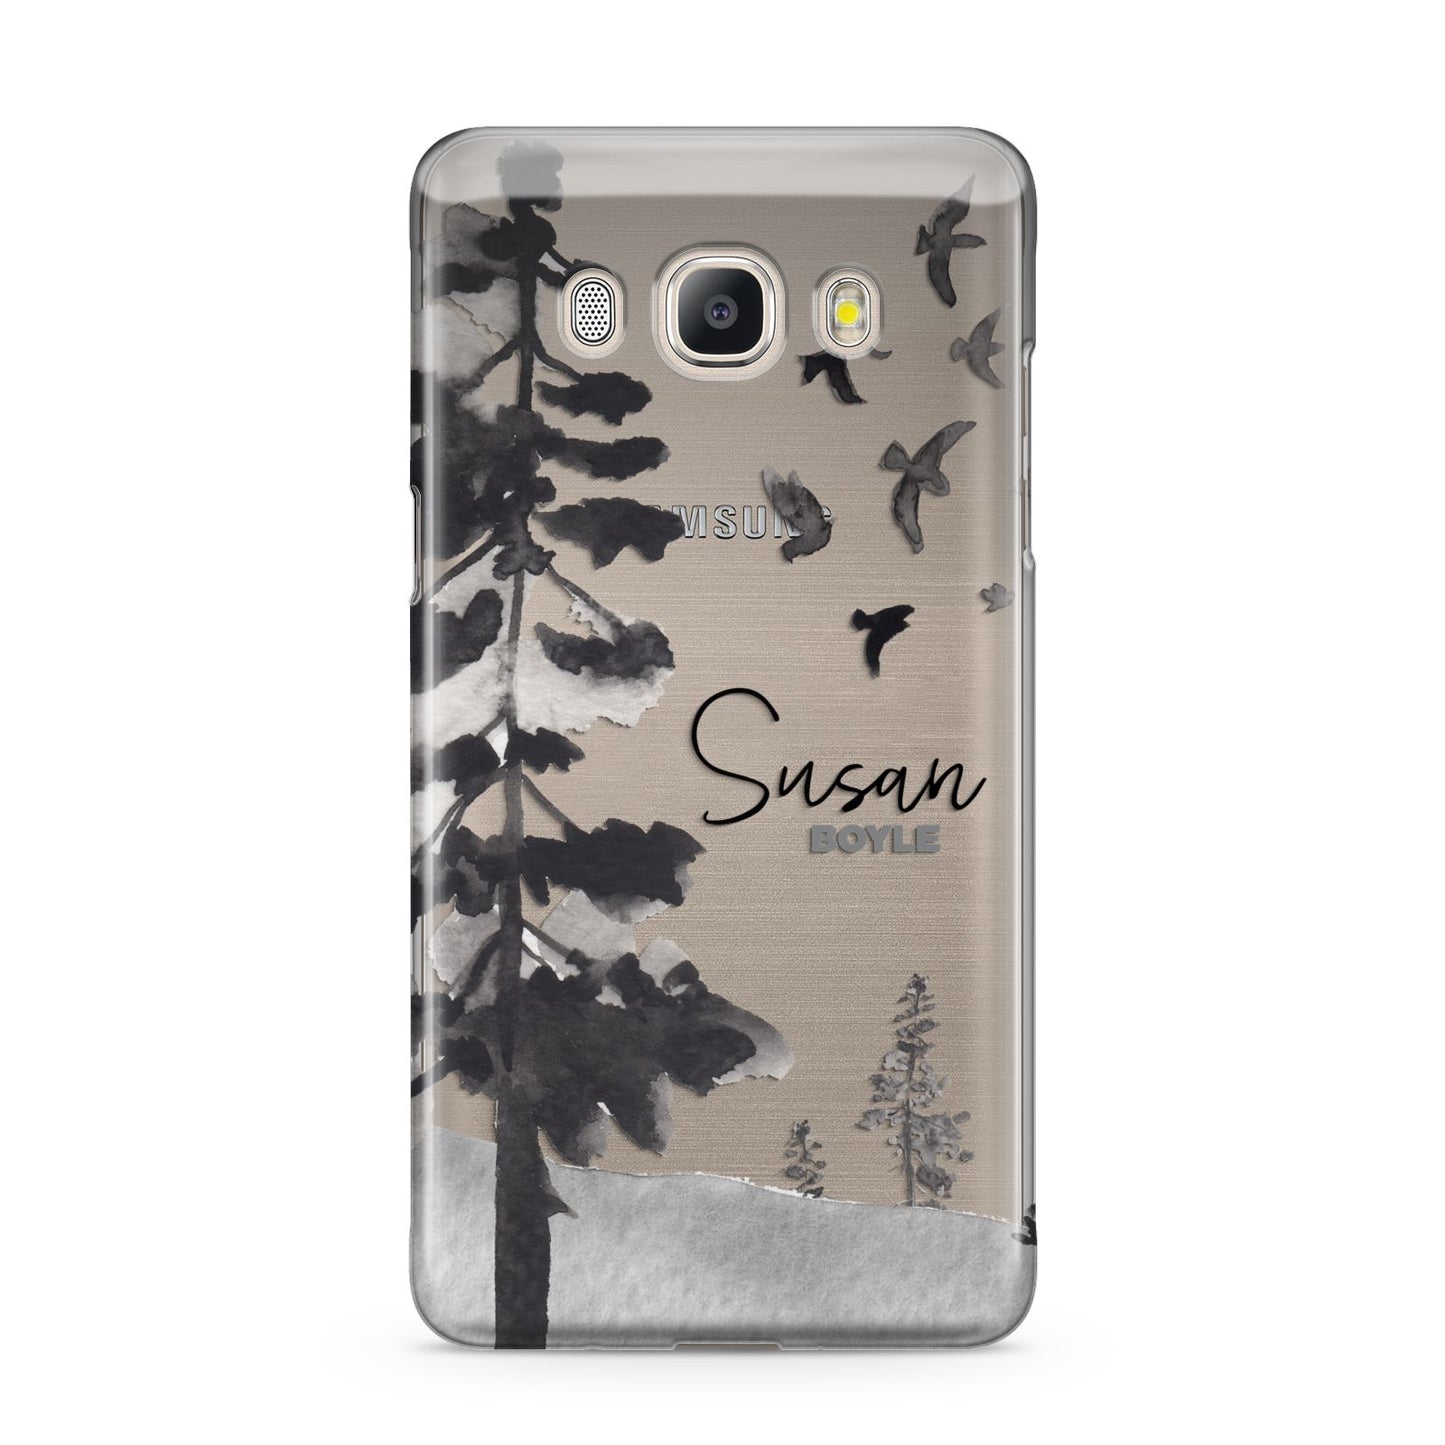 Personalised Monochrome Forest Samsung Galaxy J5 2016 Case